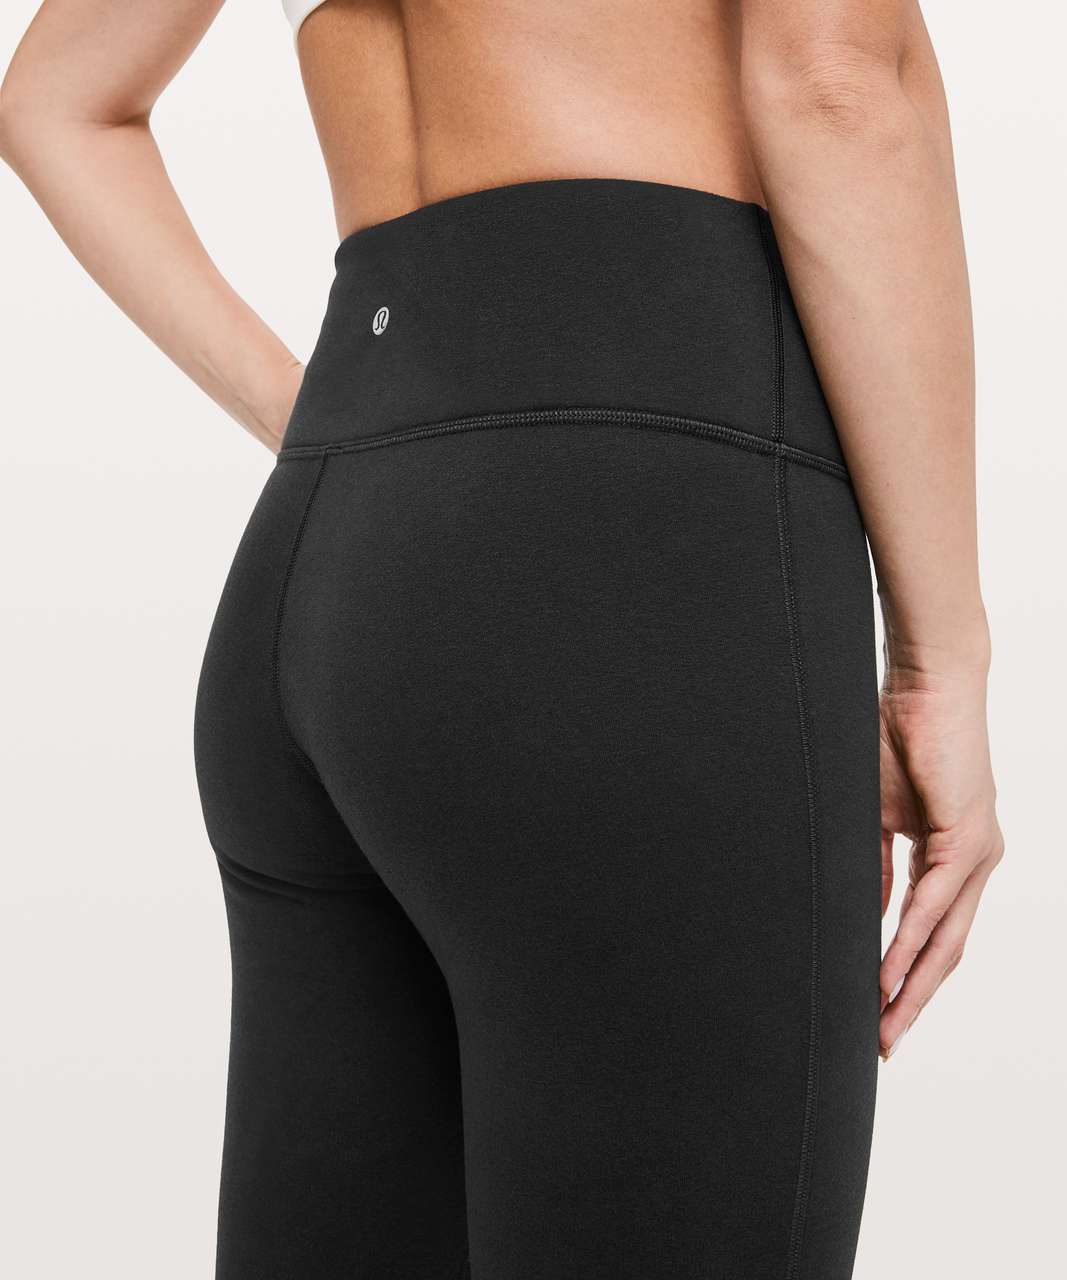 Small Hole In Lululemon Pants  International Society of Precision  Agriculture